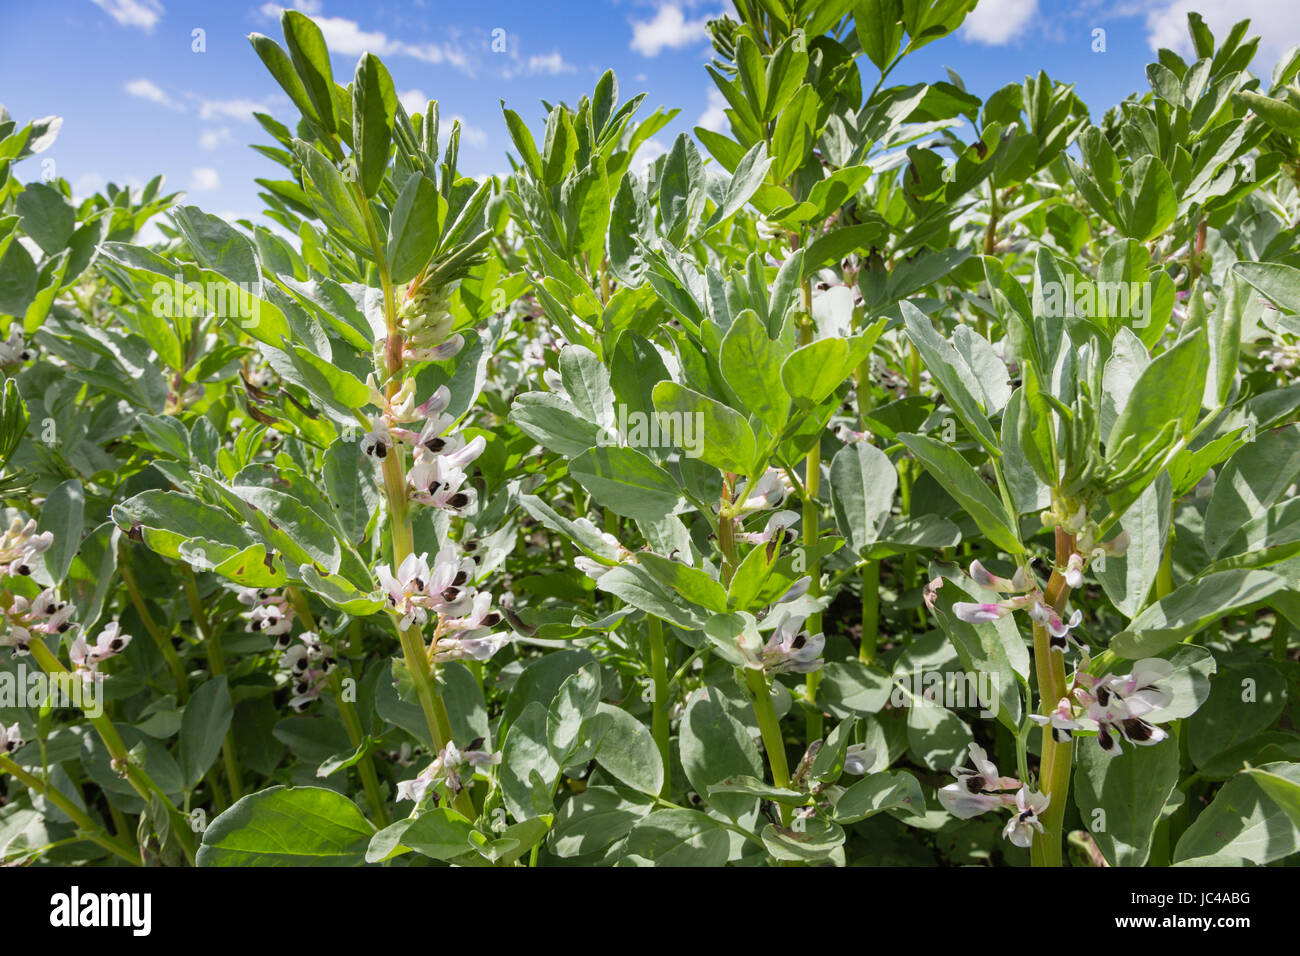 Medium close up of broad beans growing in a field UK Stock Photo